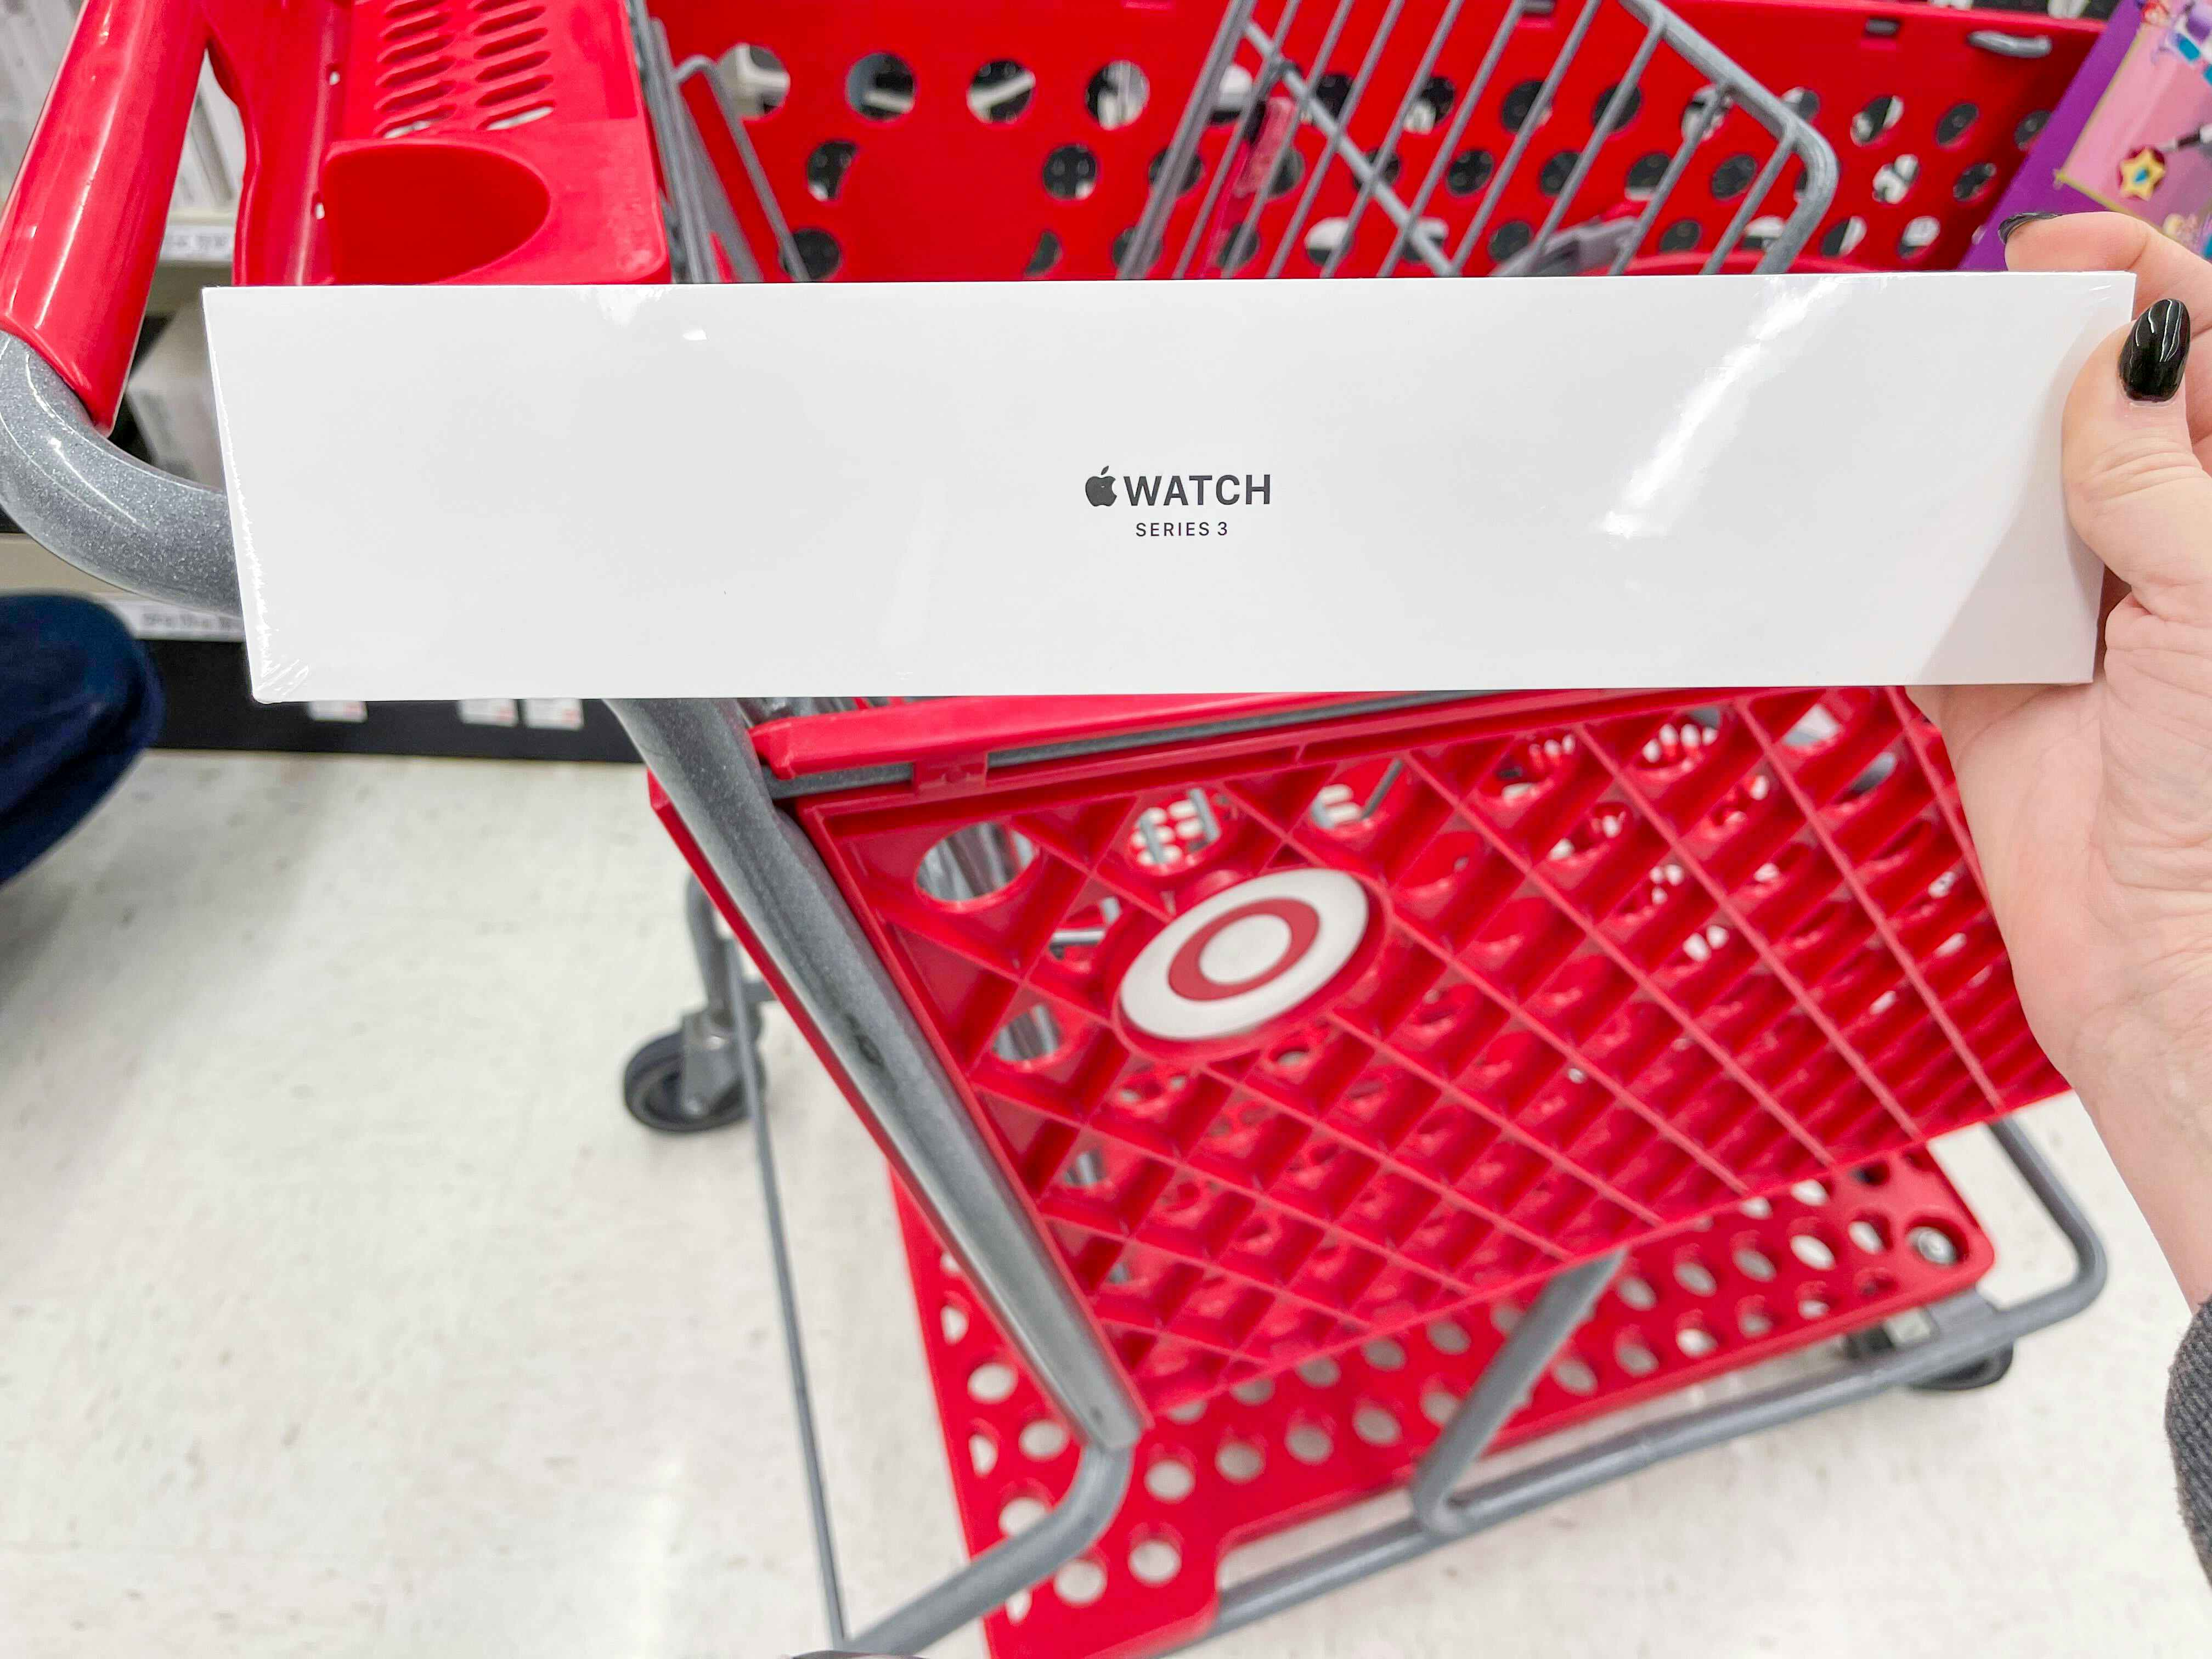 A person's hand holding an Apple Watch Series 3 box in front of a Target shopping cart.